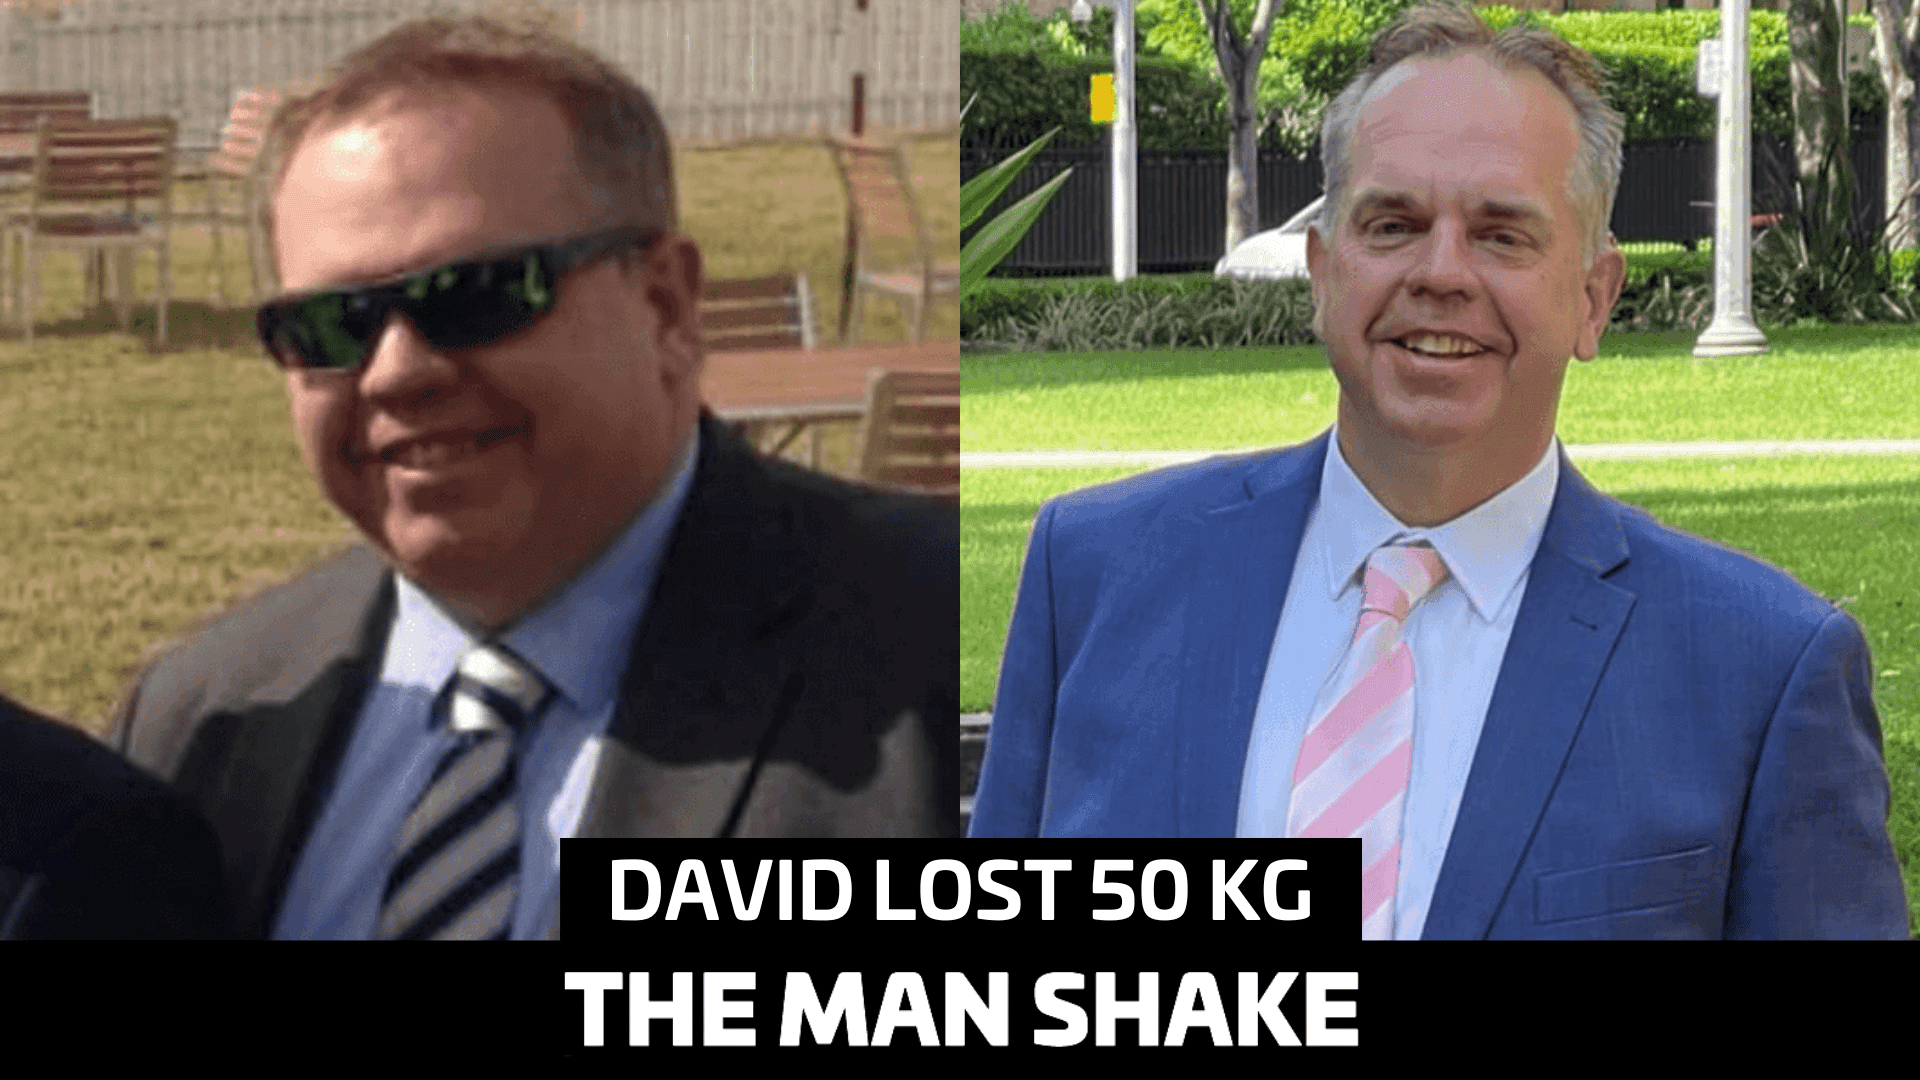 After nearly maxing out the scales, David lost 50kg!